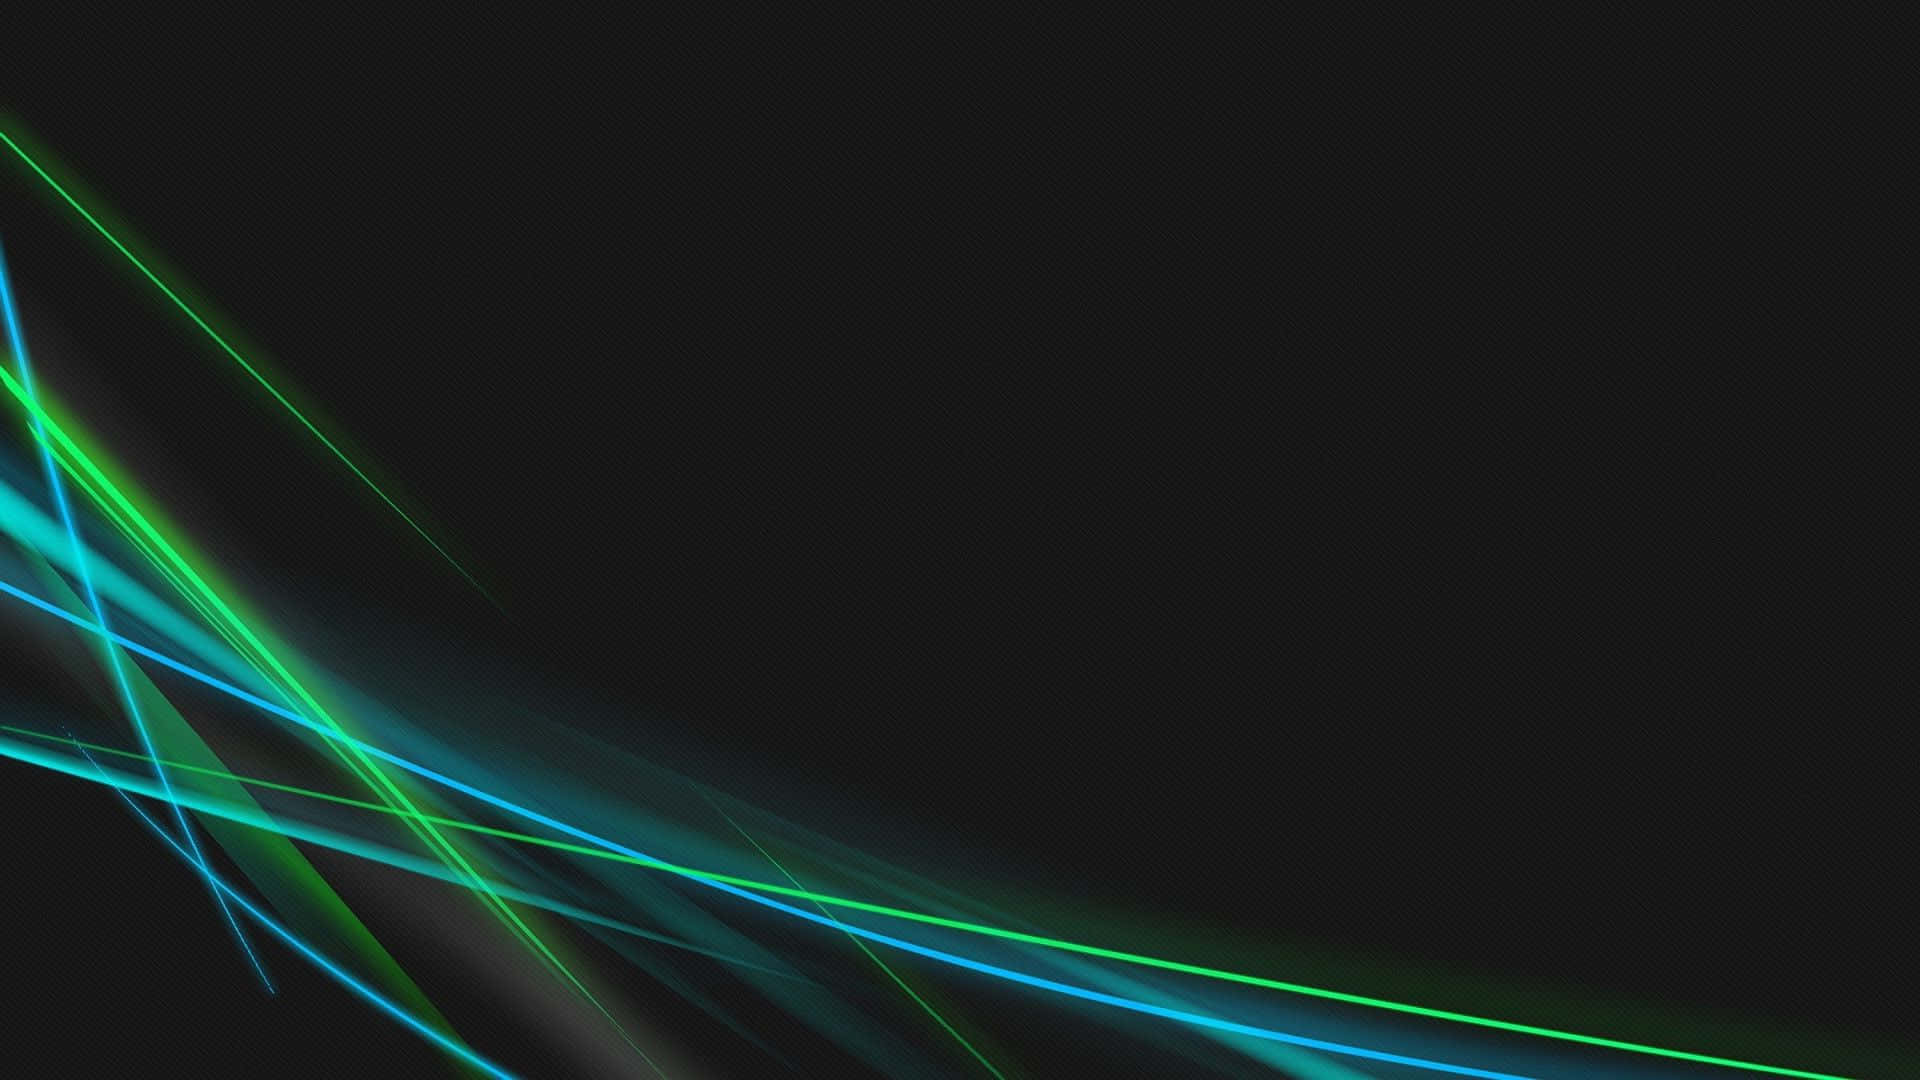 Green And Black Background With Blue Line